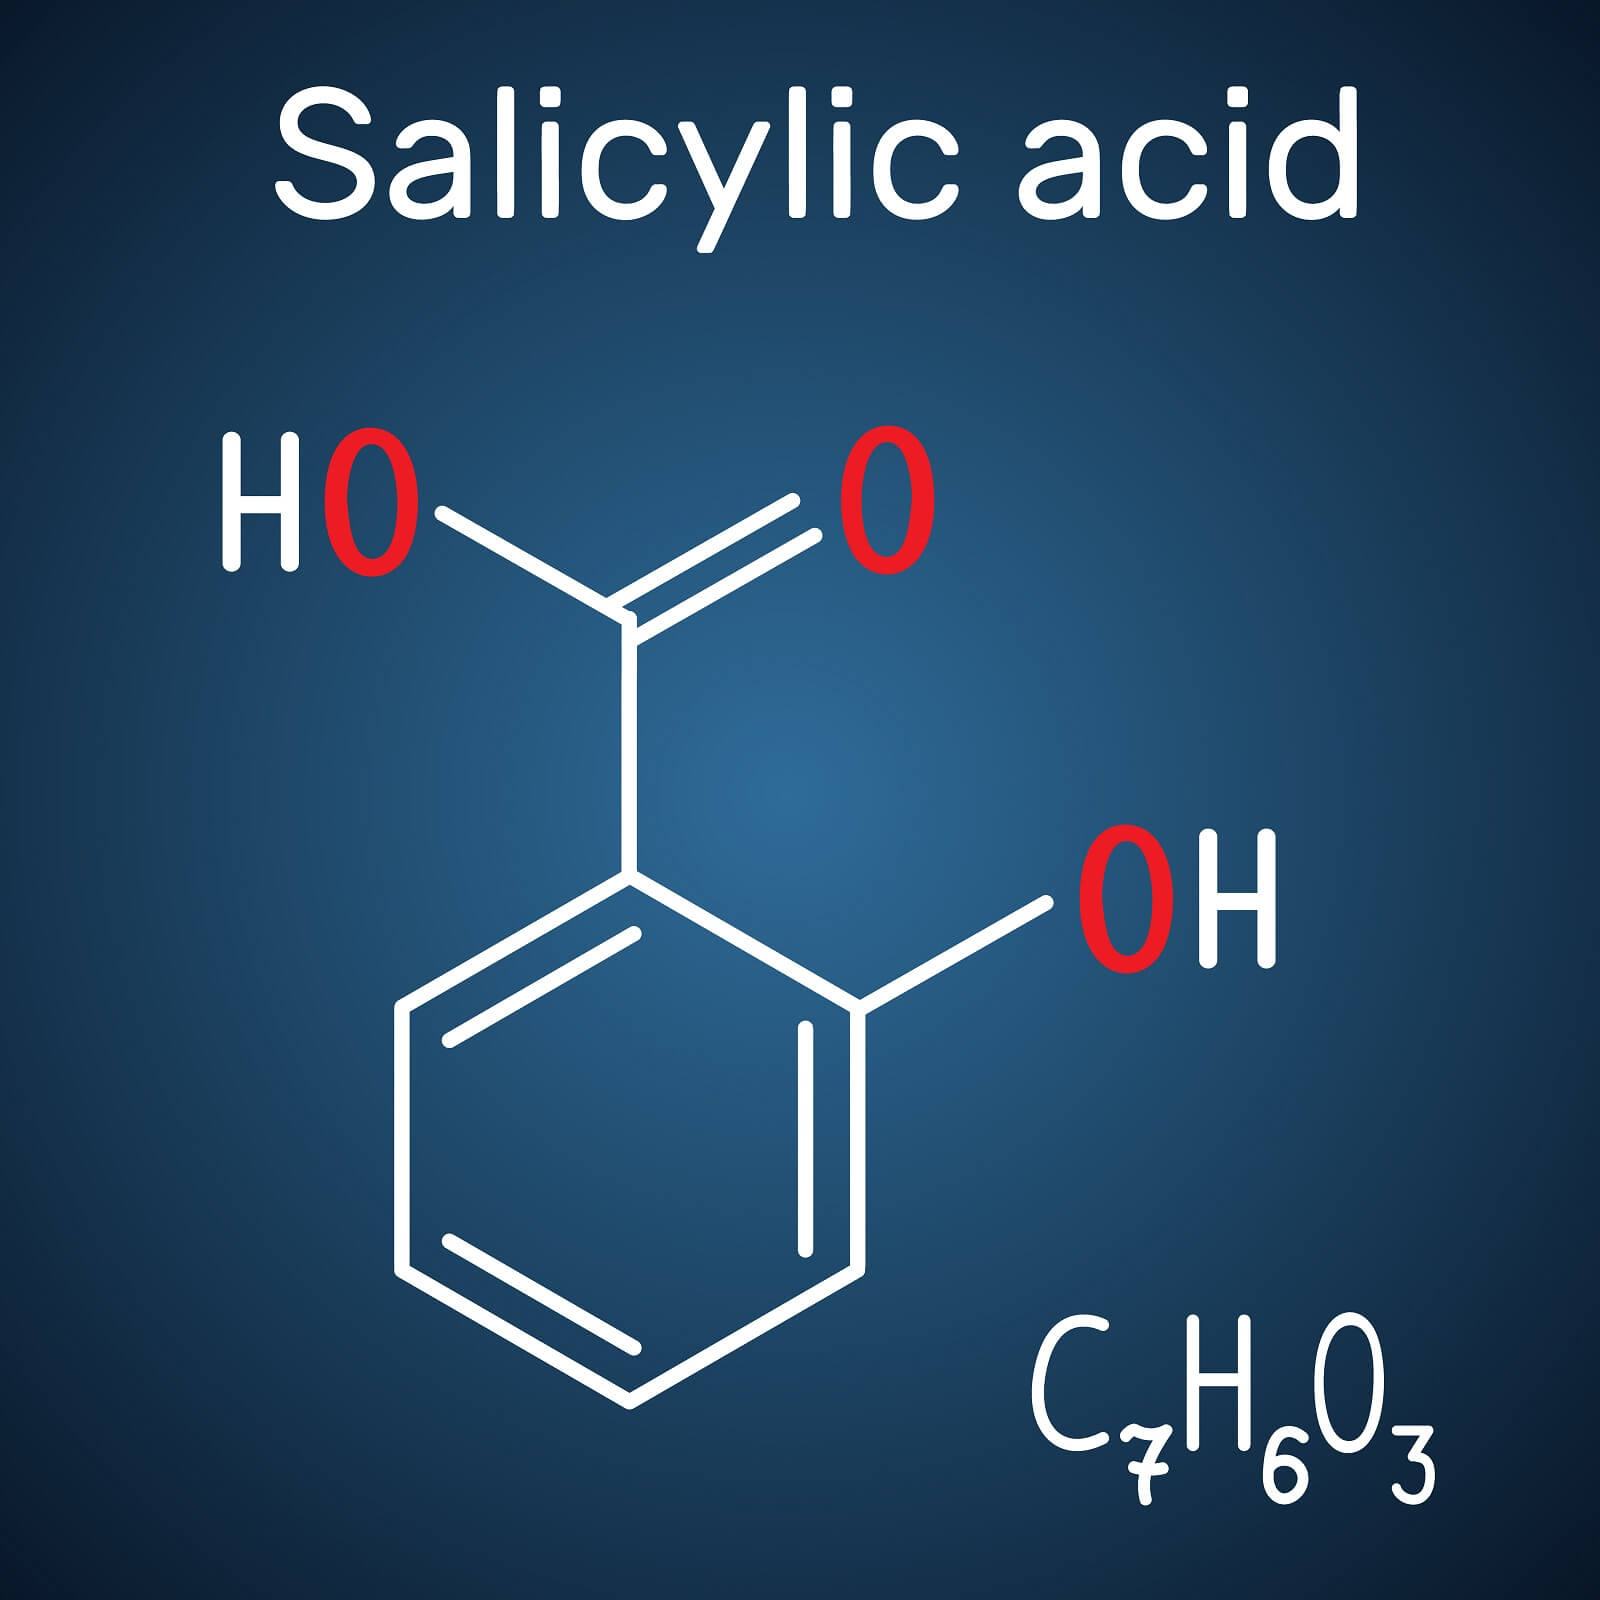 Salicylic acid molecule. It is a type of phenolic acid. Structural chemical formula and molecule model on the dark blue background. Vector illustration.